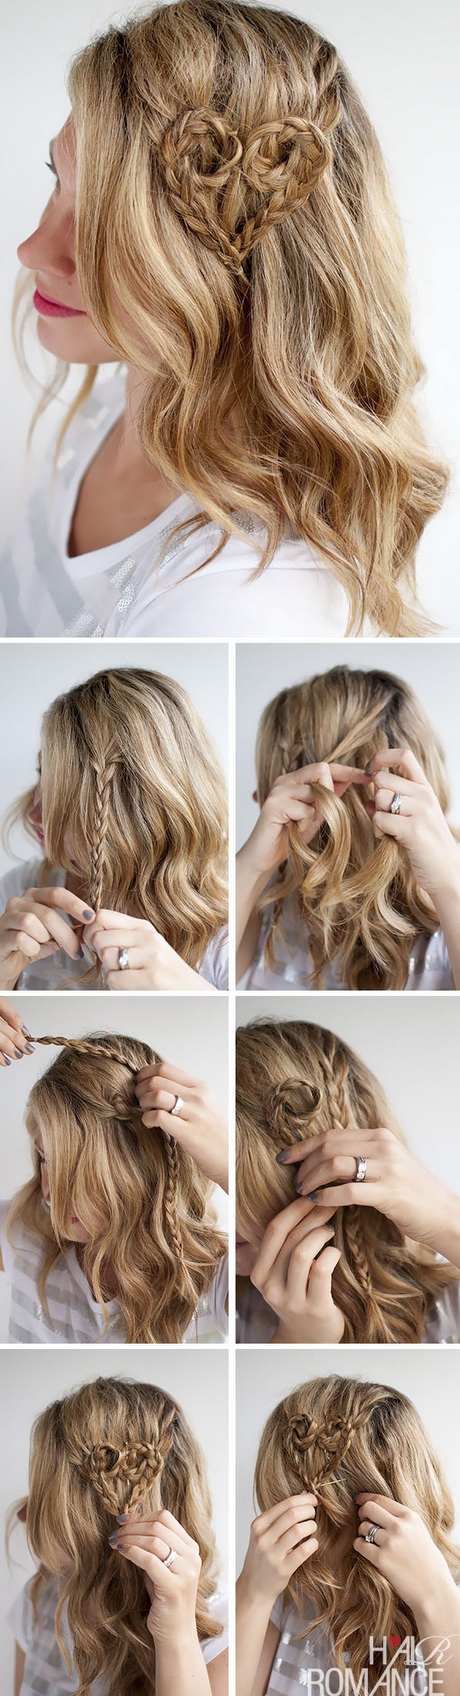 step-by-step-hairstyles-for-prom-25_10 Step by step hairstyles for prom